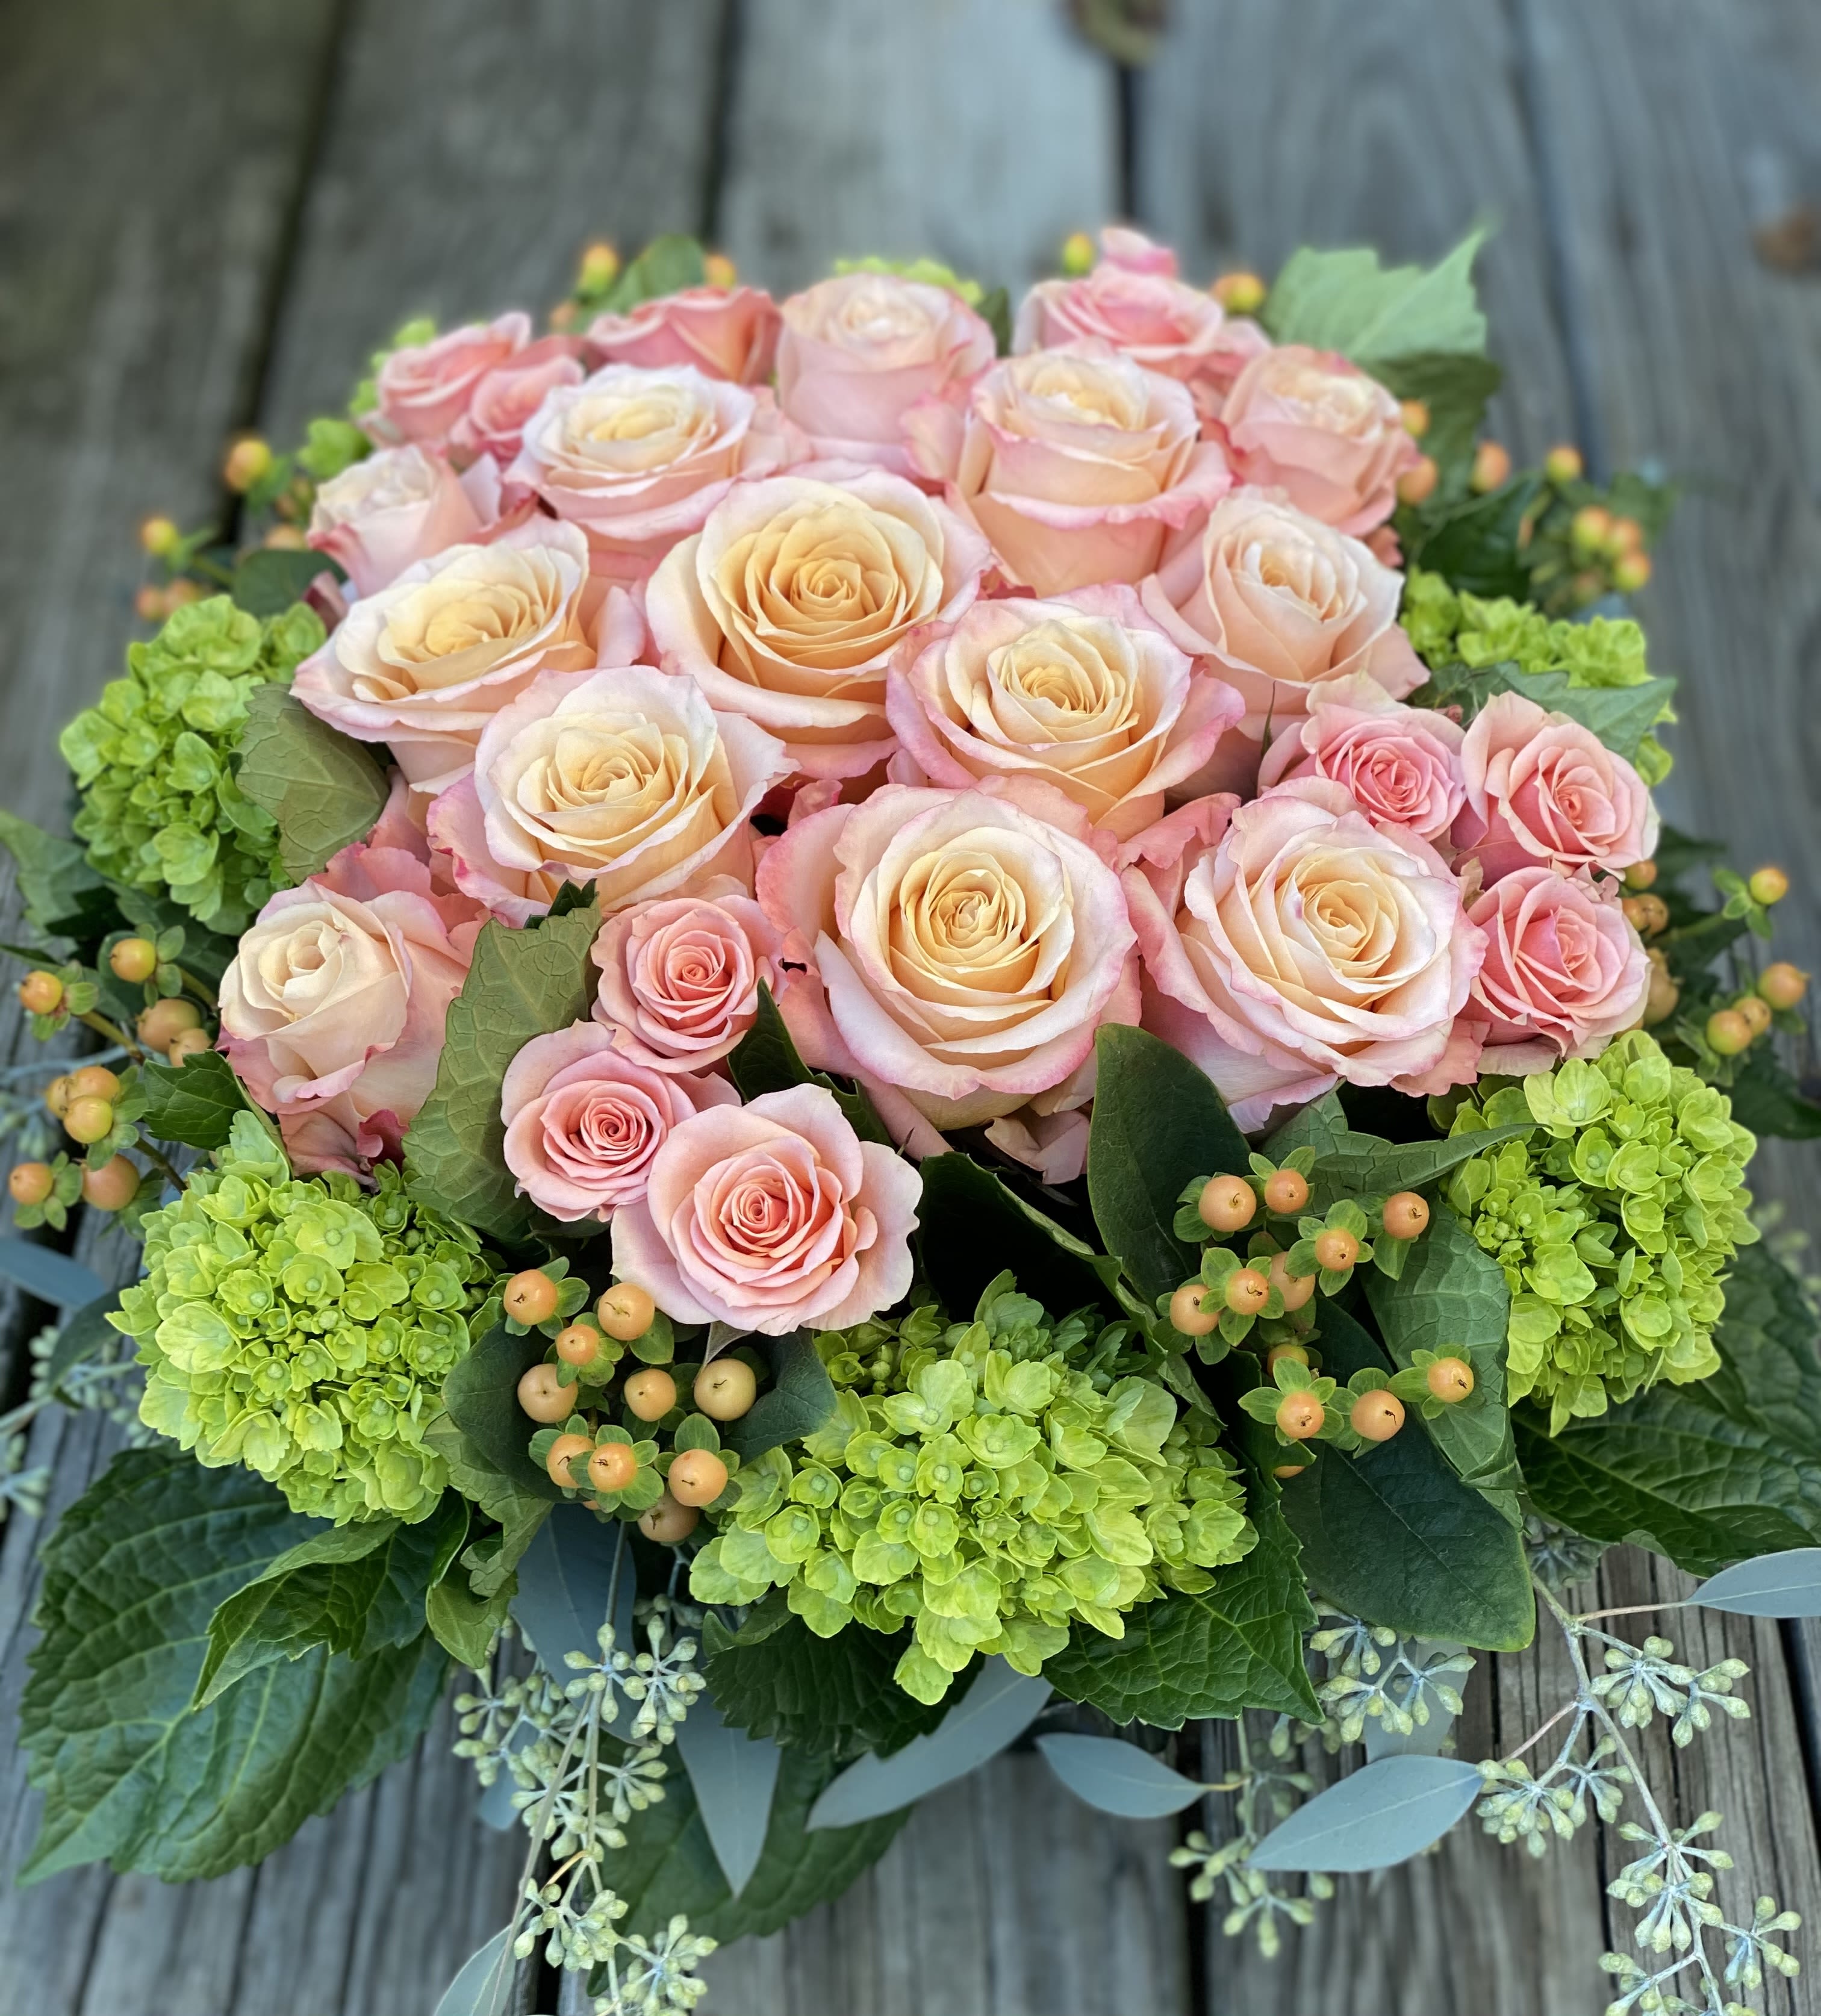 Rose Pave` in Square Vase - Seasonal colored roses in low glass cube, green hydrangeas and berries.